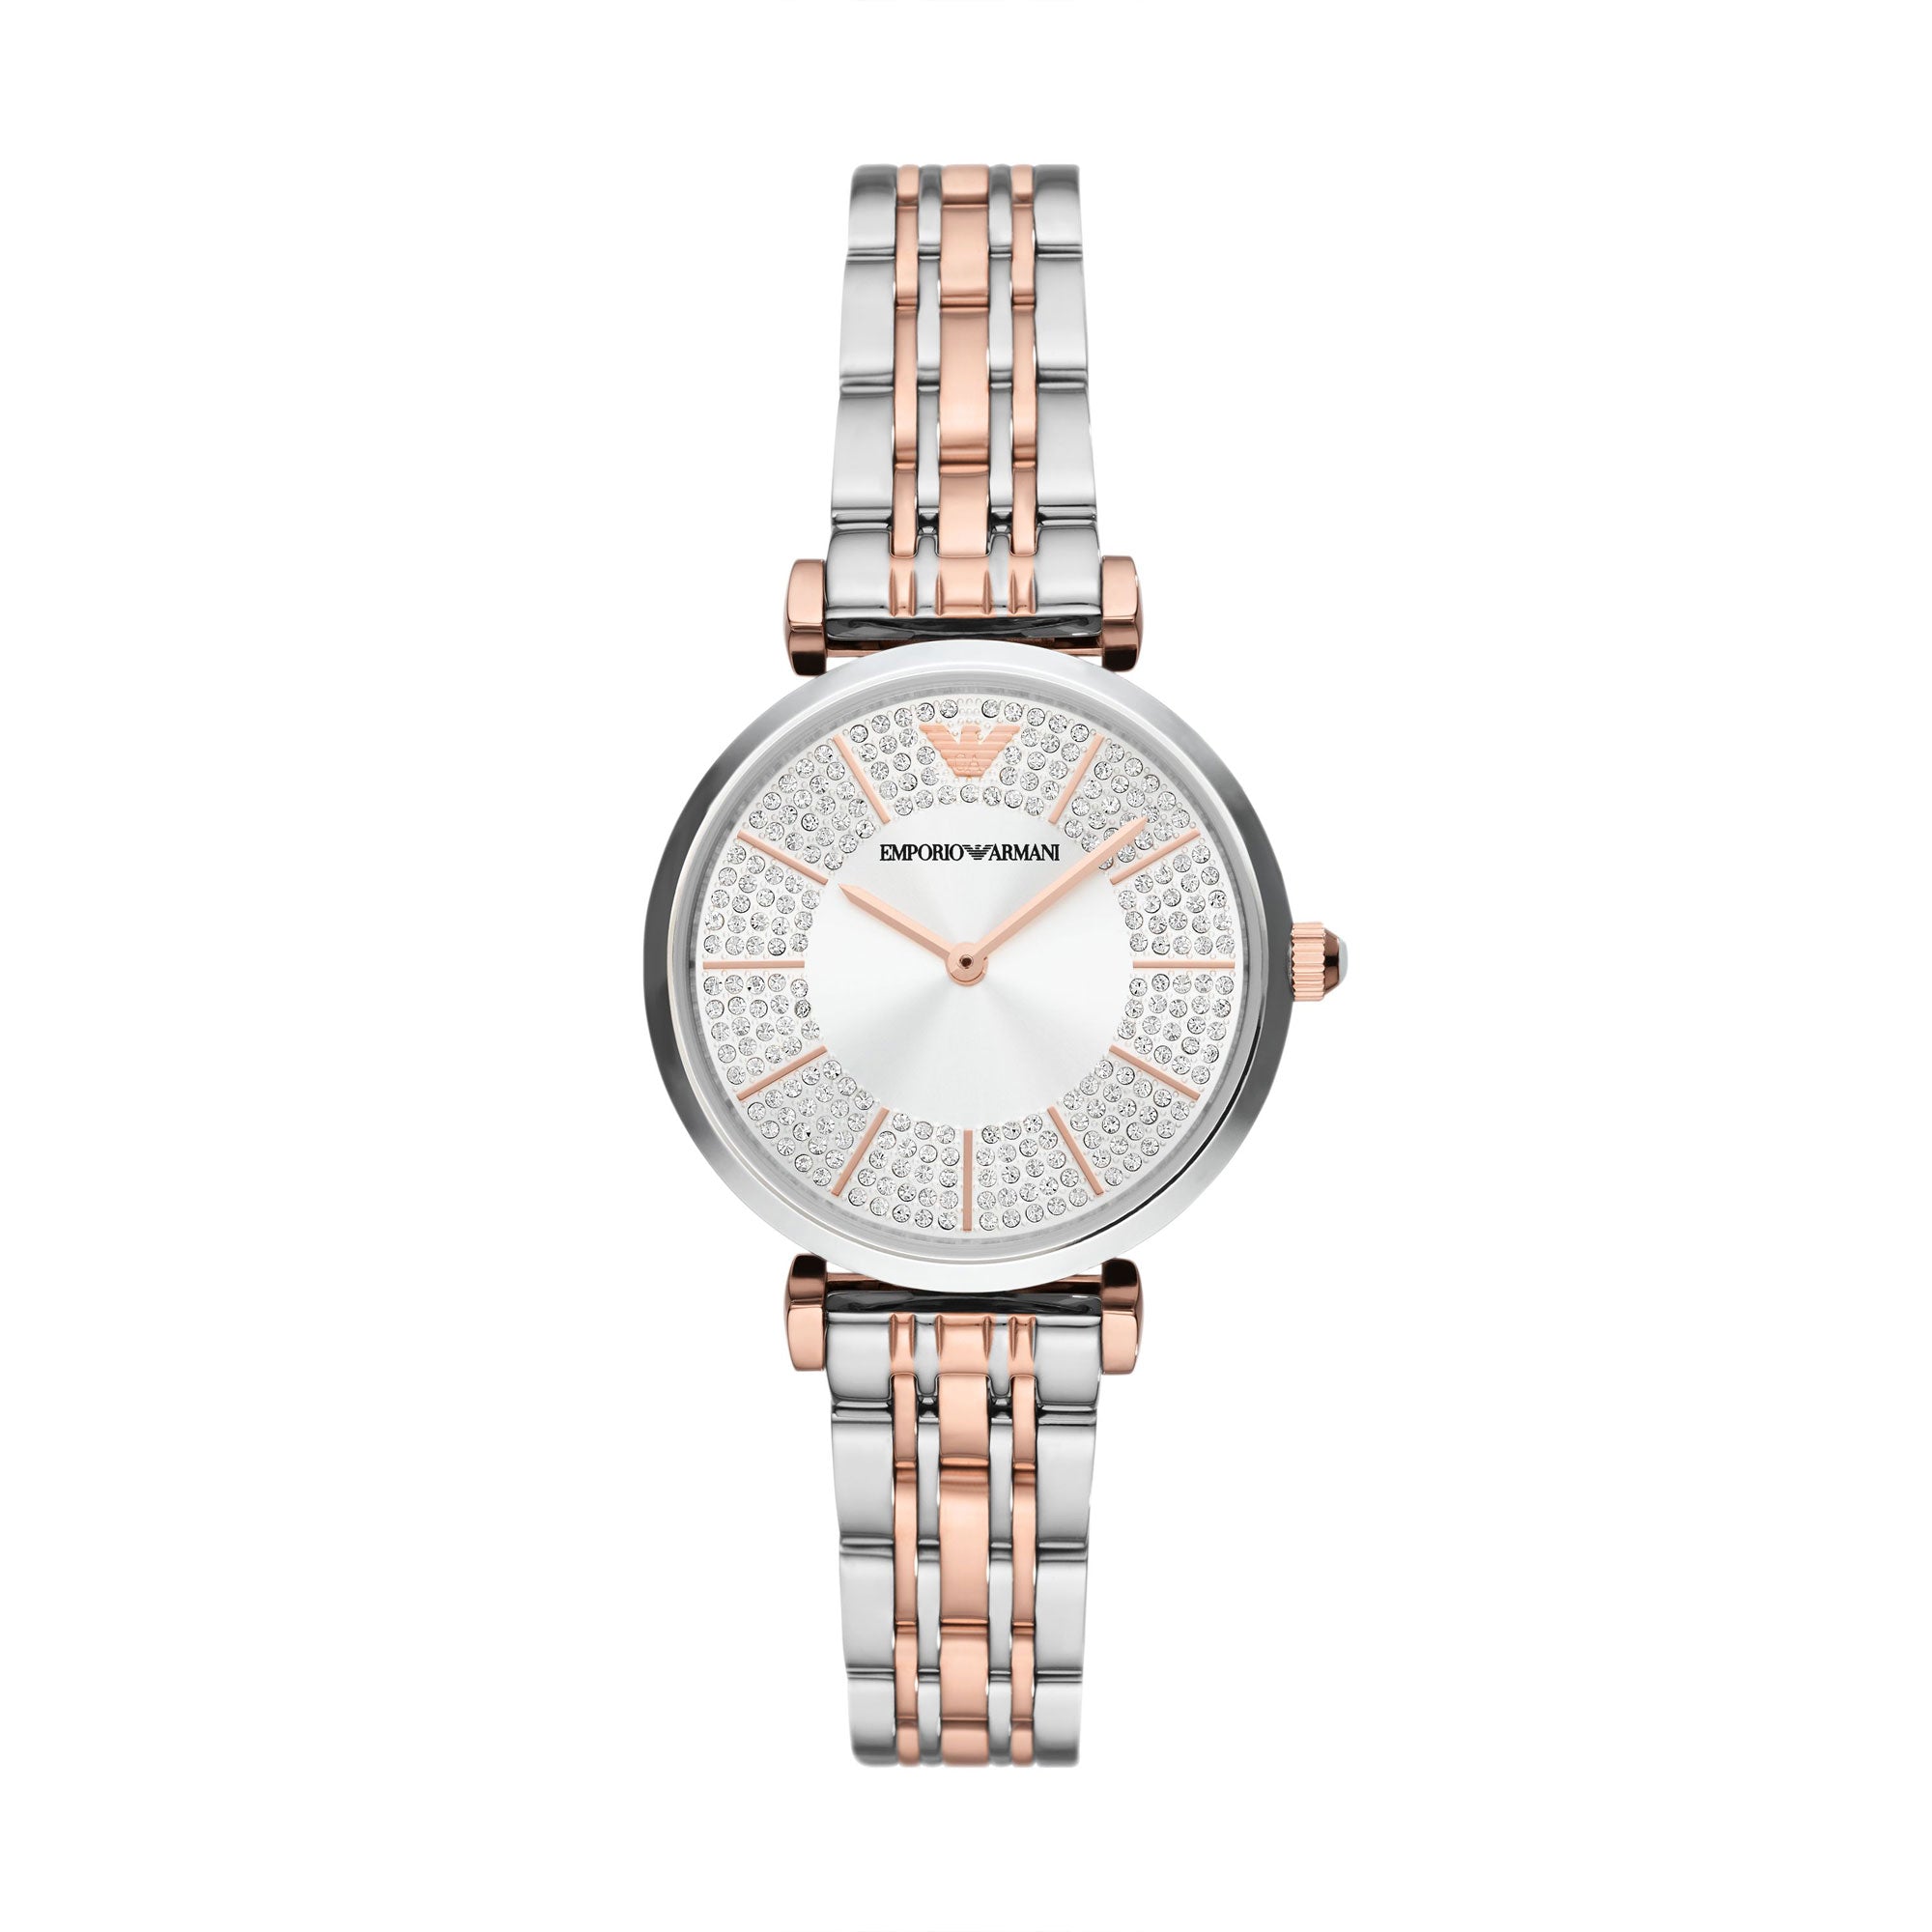 EMPORIO ARMANI GIANNI T-BAR WOMEN'S STAINLESS STEEL WATCH – The Watch House